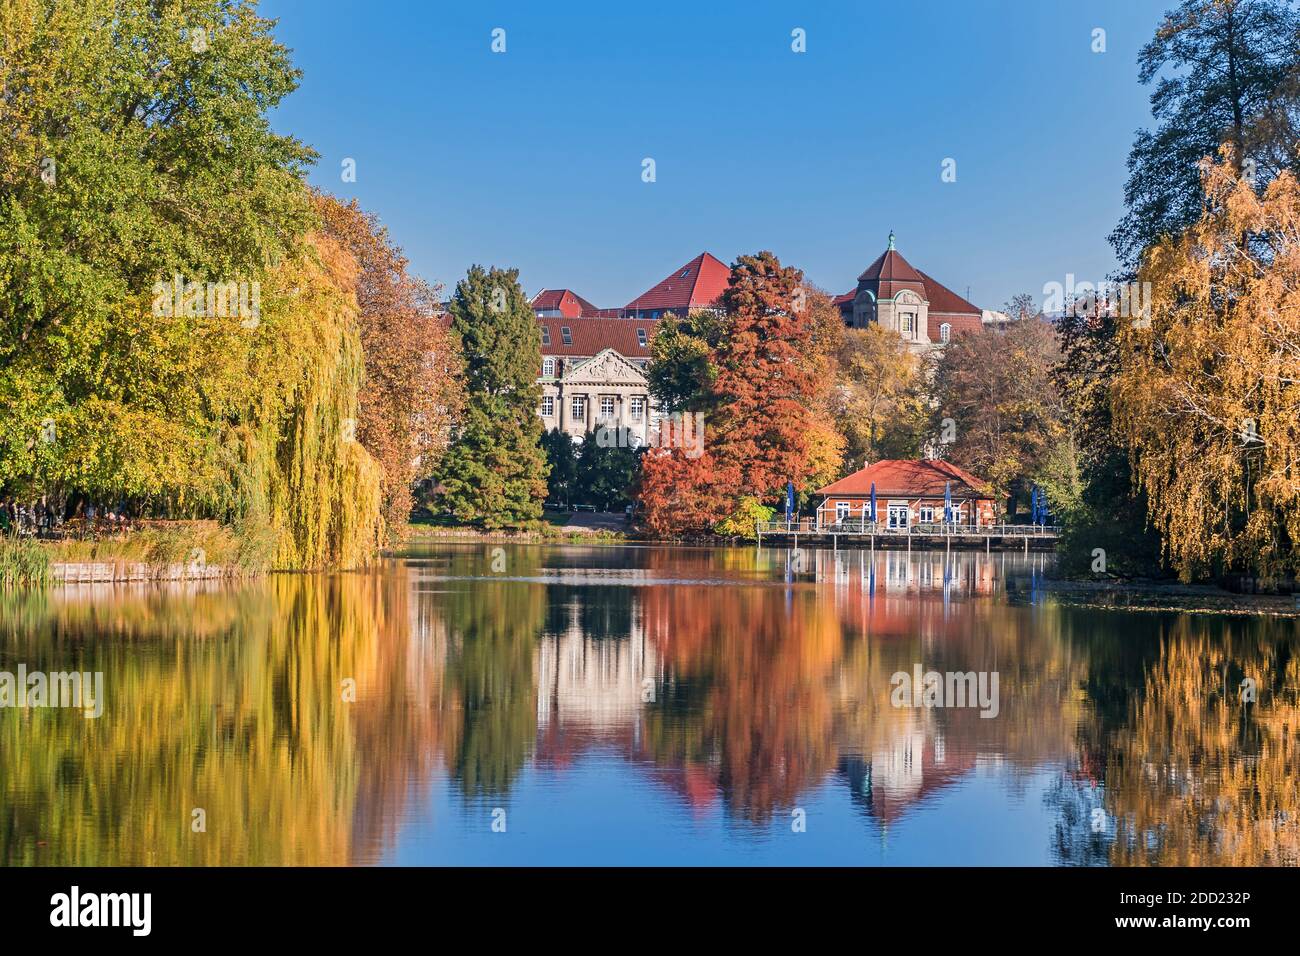 Berlin, Germany - November 7, 2020: Park and a listed garden Lietzensee with autumn coloured trees and buildings on the shore of Lake Lietzen with its Stock Photo